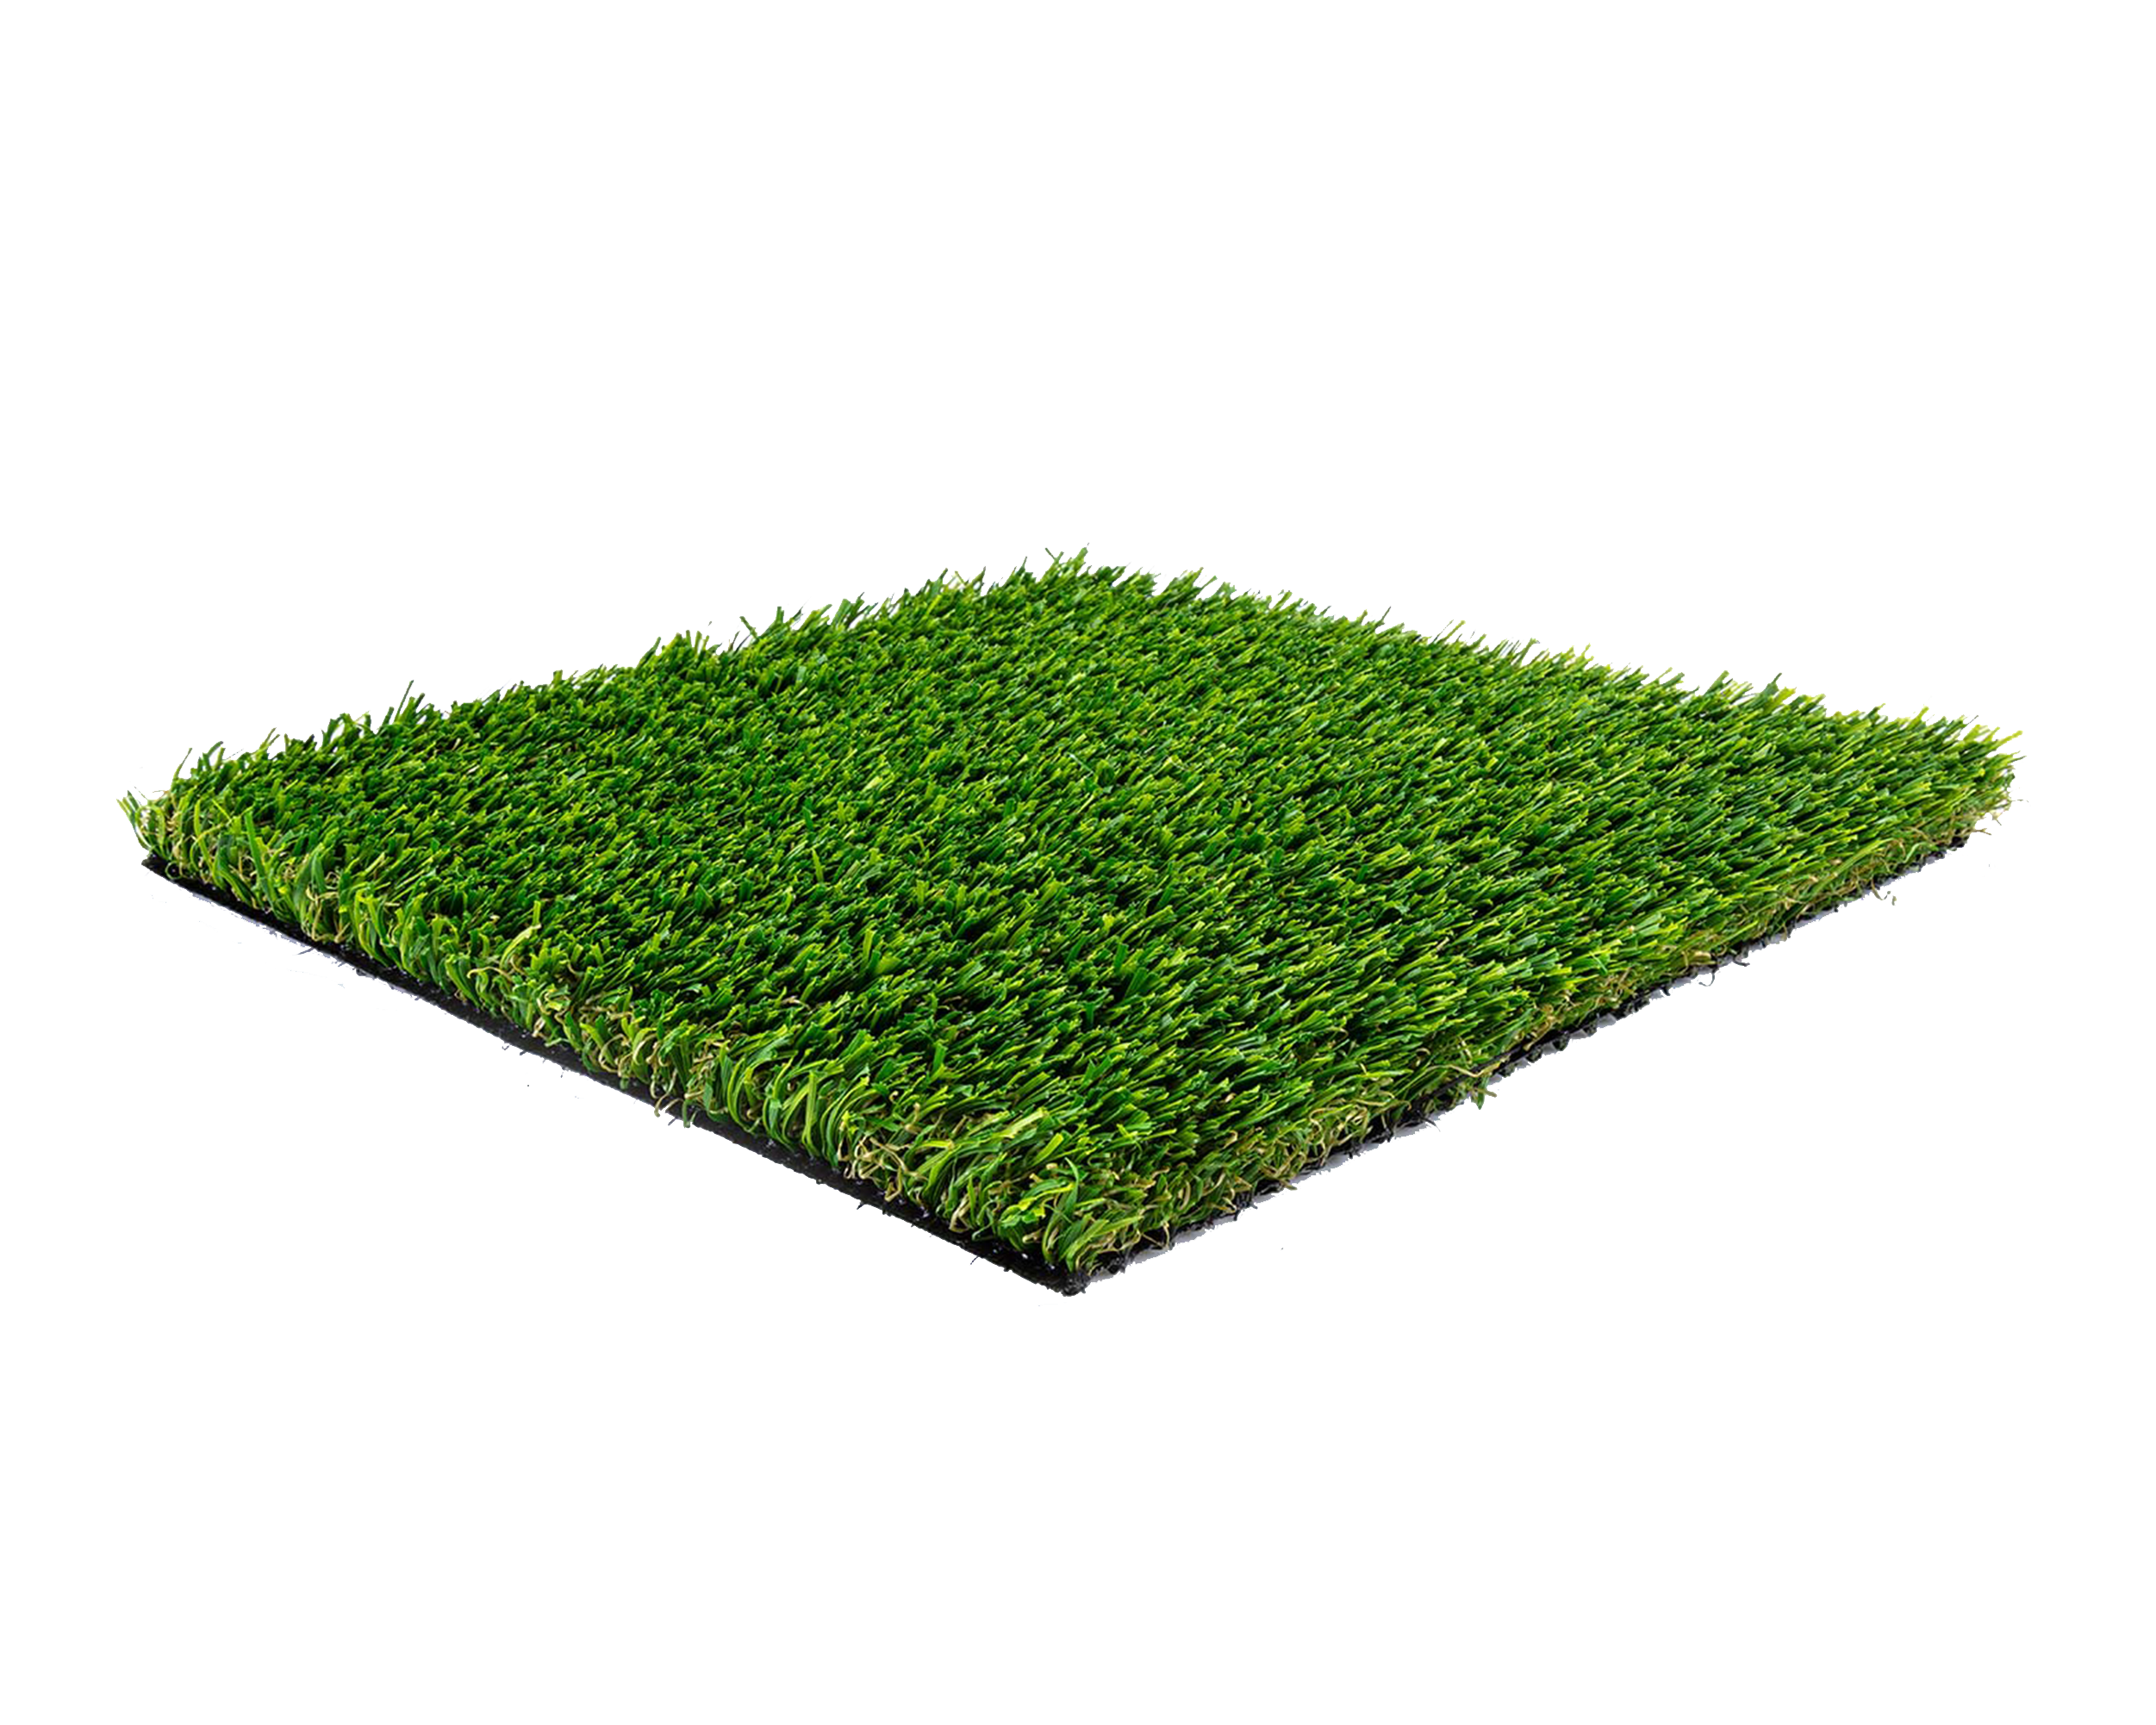 EcoShield's Artificial Turf has a 20 plus year life expectancy